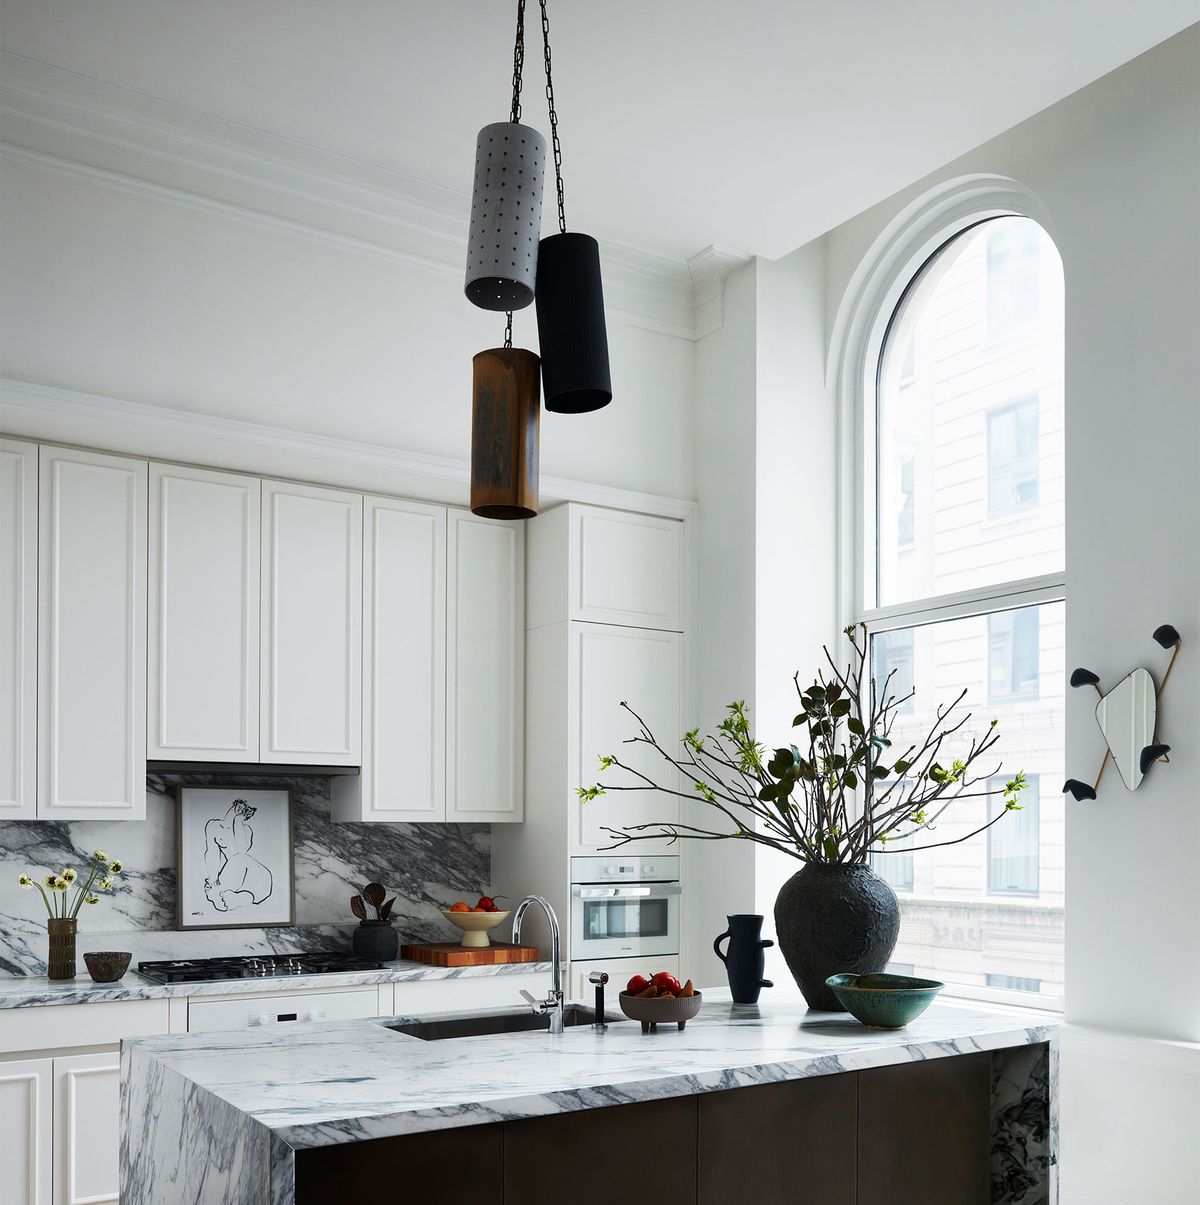 Am I too old for these? Please say no.  Cute kitchen, Contemporary kitchen  interior, Kitchenware